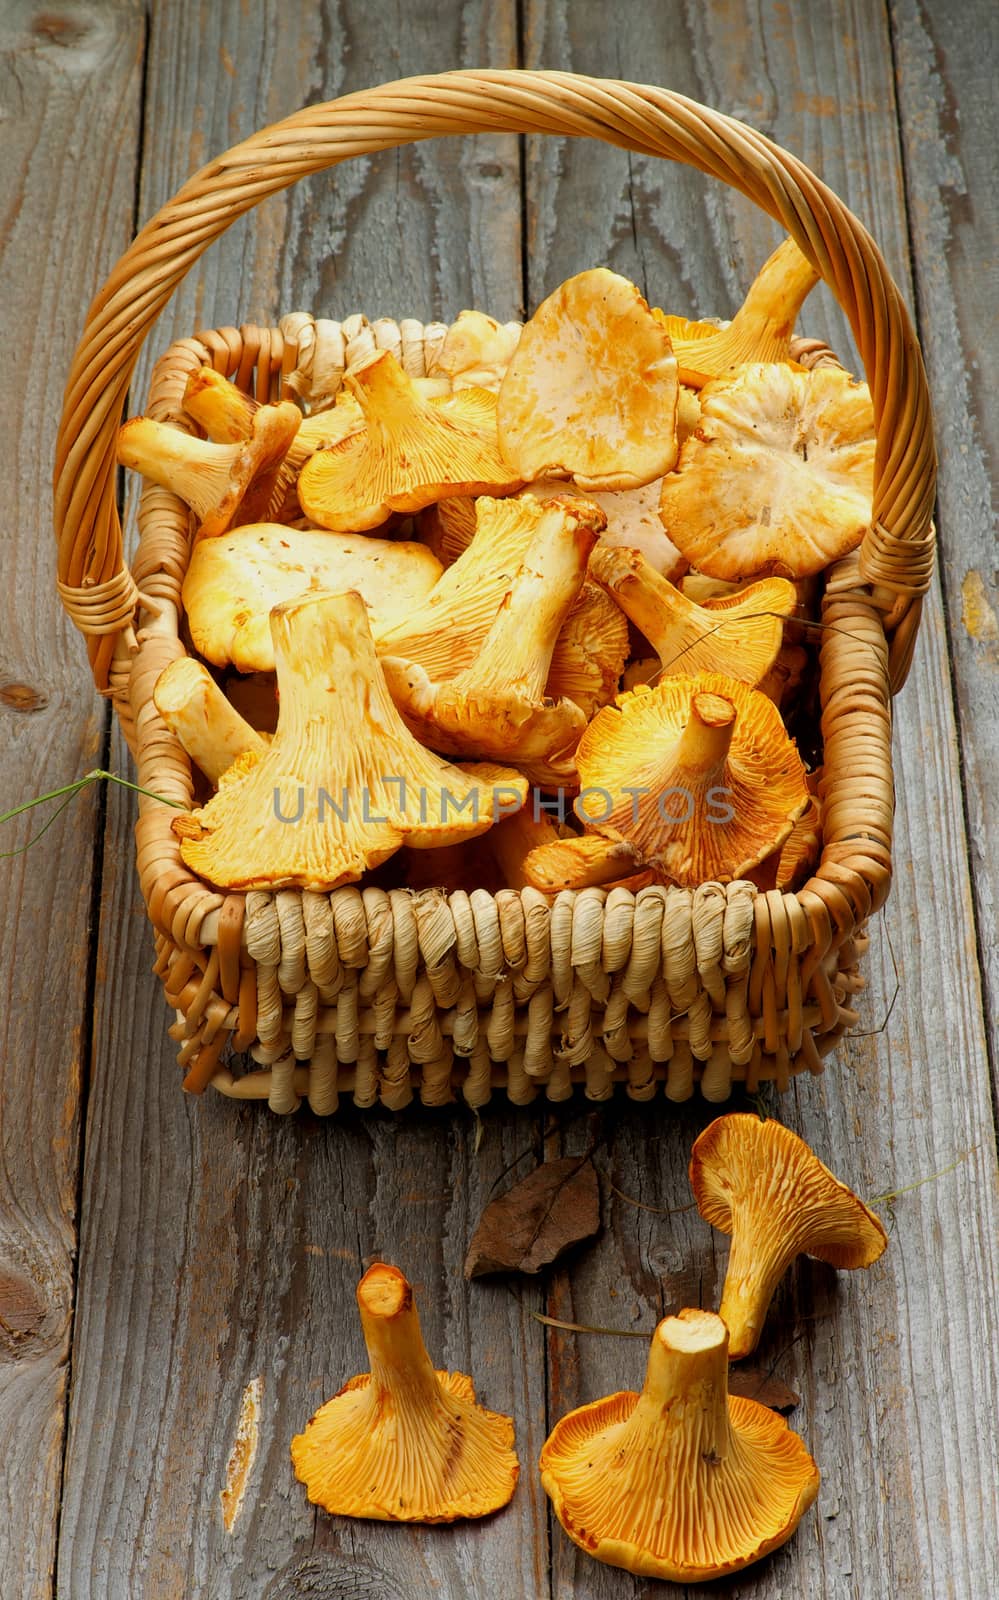 Wicker Basket Full Of Perfect Raw Chanterelles closeup on Rustic Wooden background